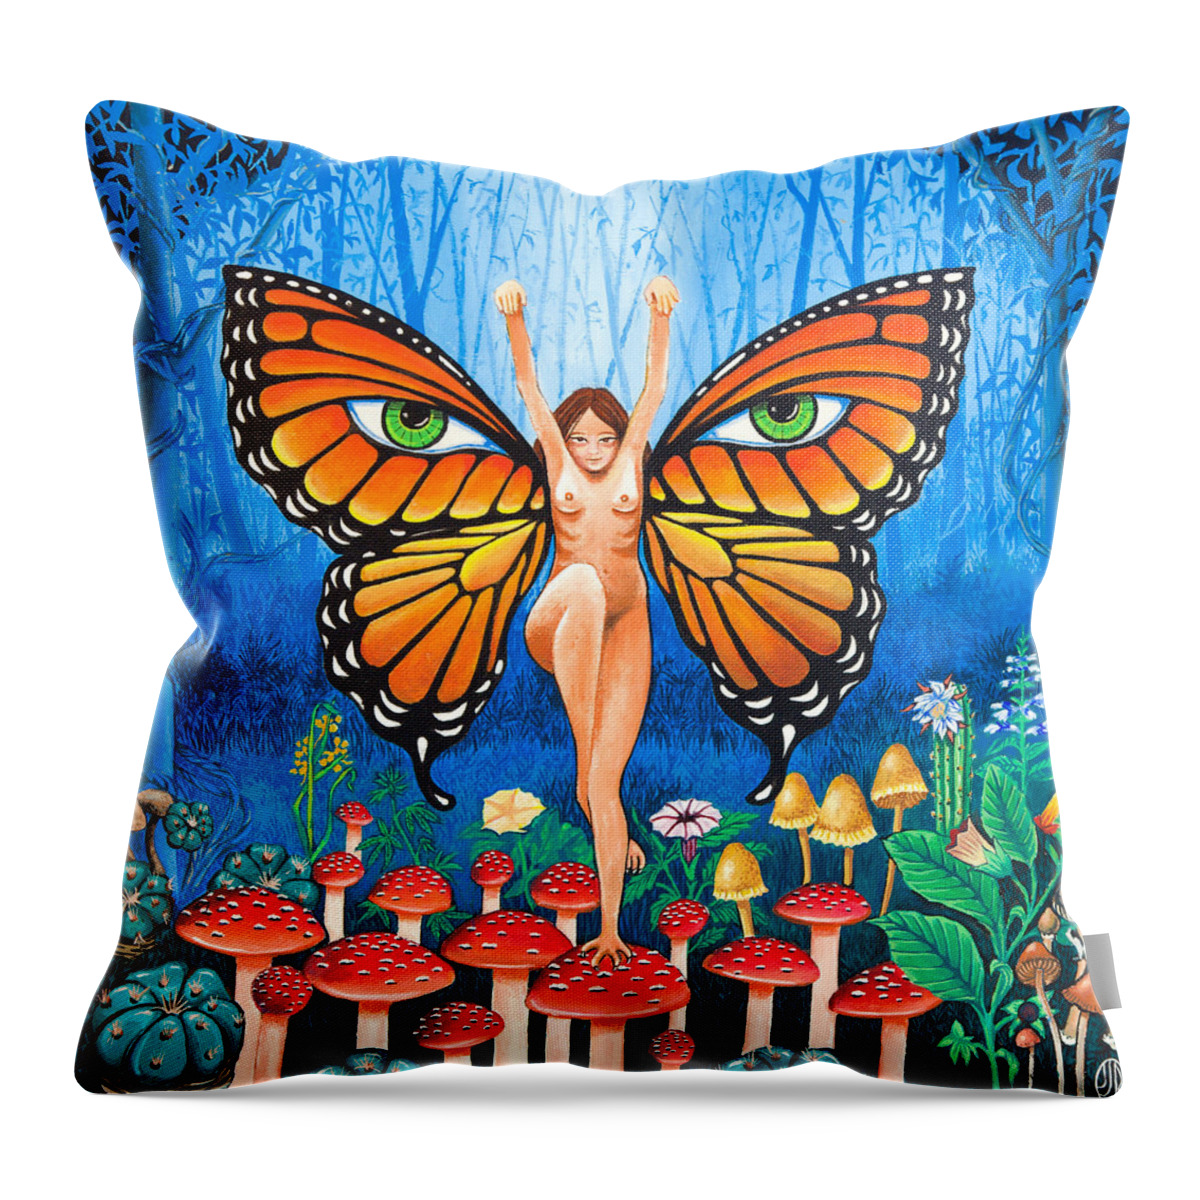 Visionary Plants Throw Pillow featuring the painting Visionaries by James RODERICK